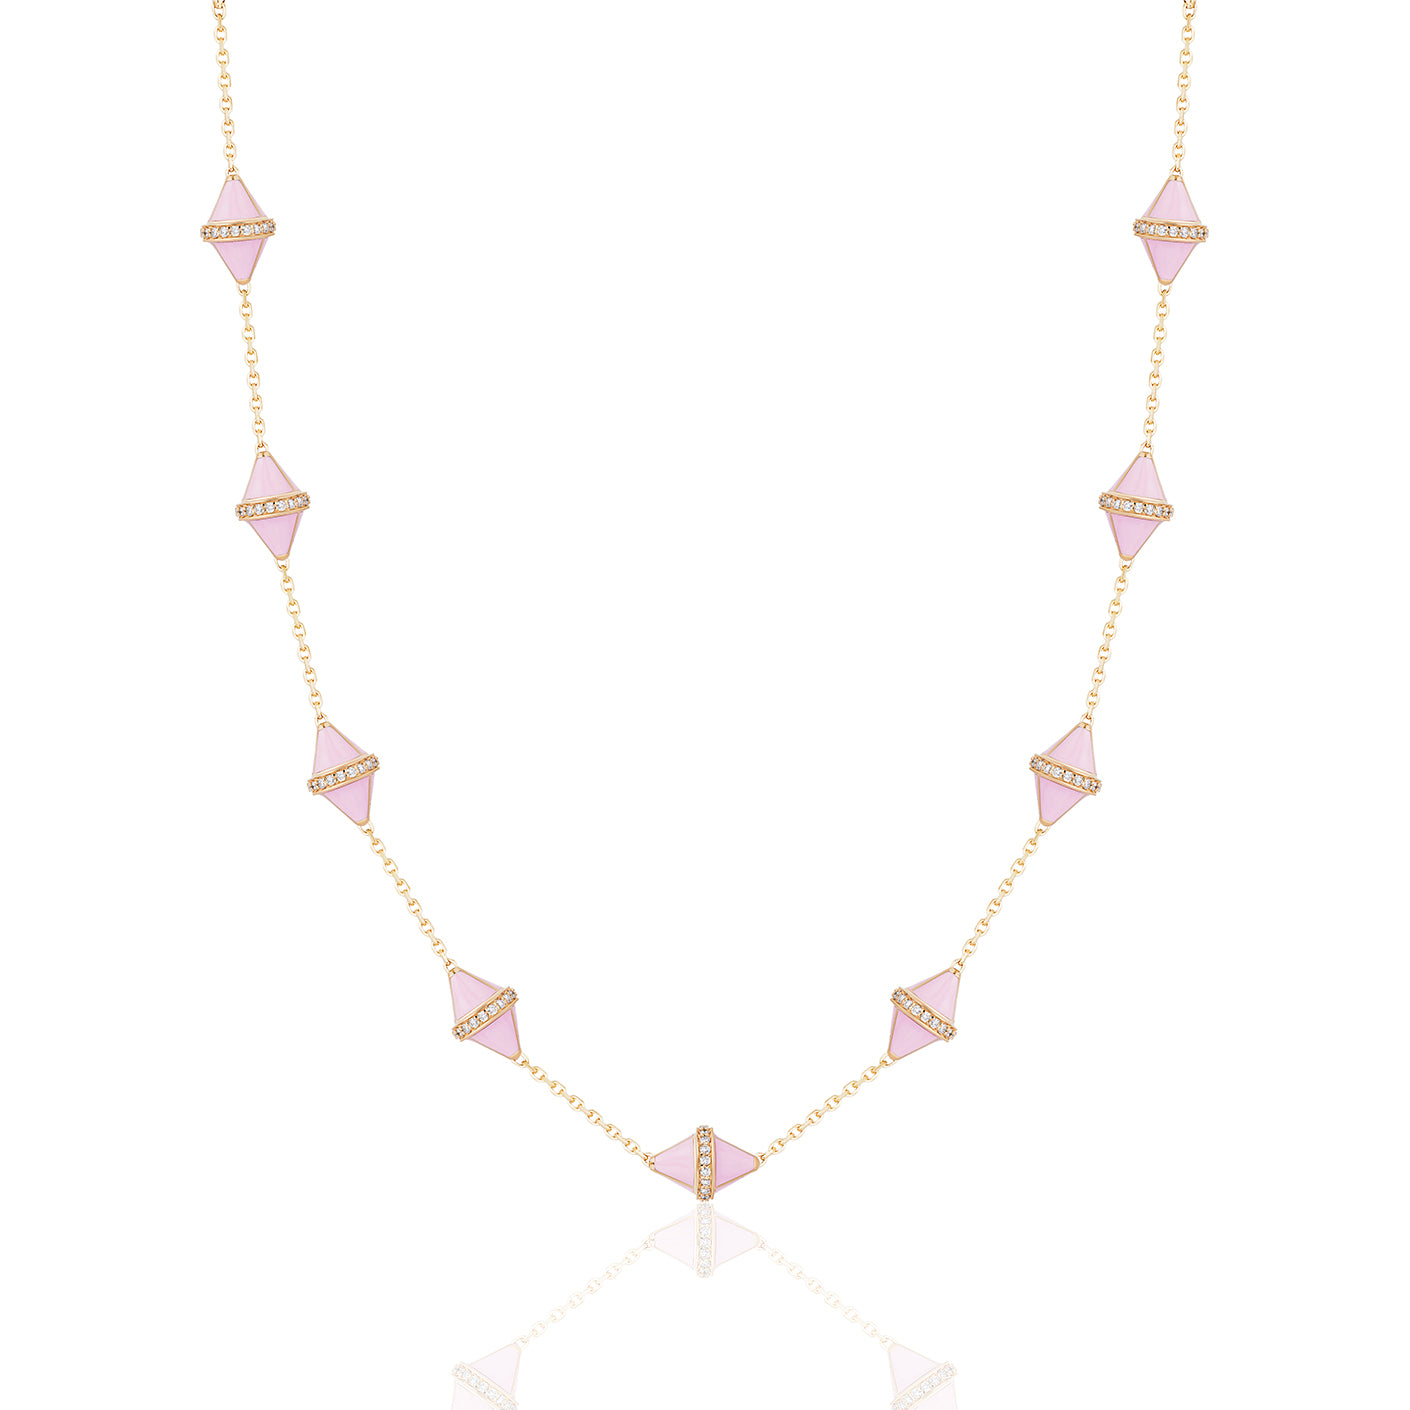 Tresor Iconec Necklace, 10 Motifs and Diamonds (Pink)